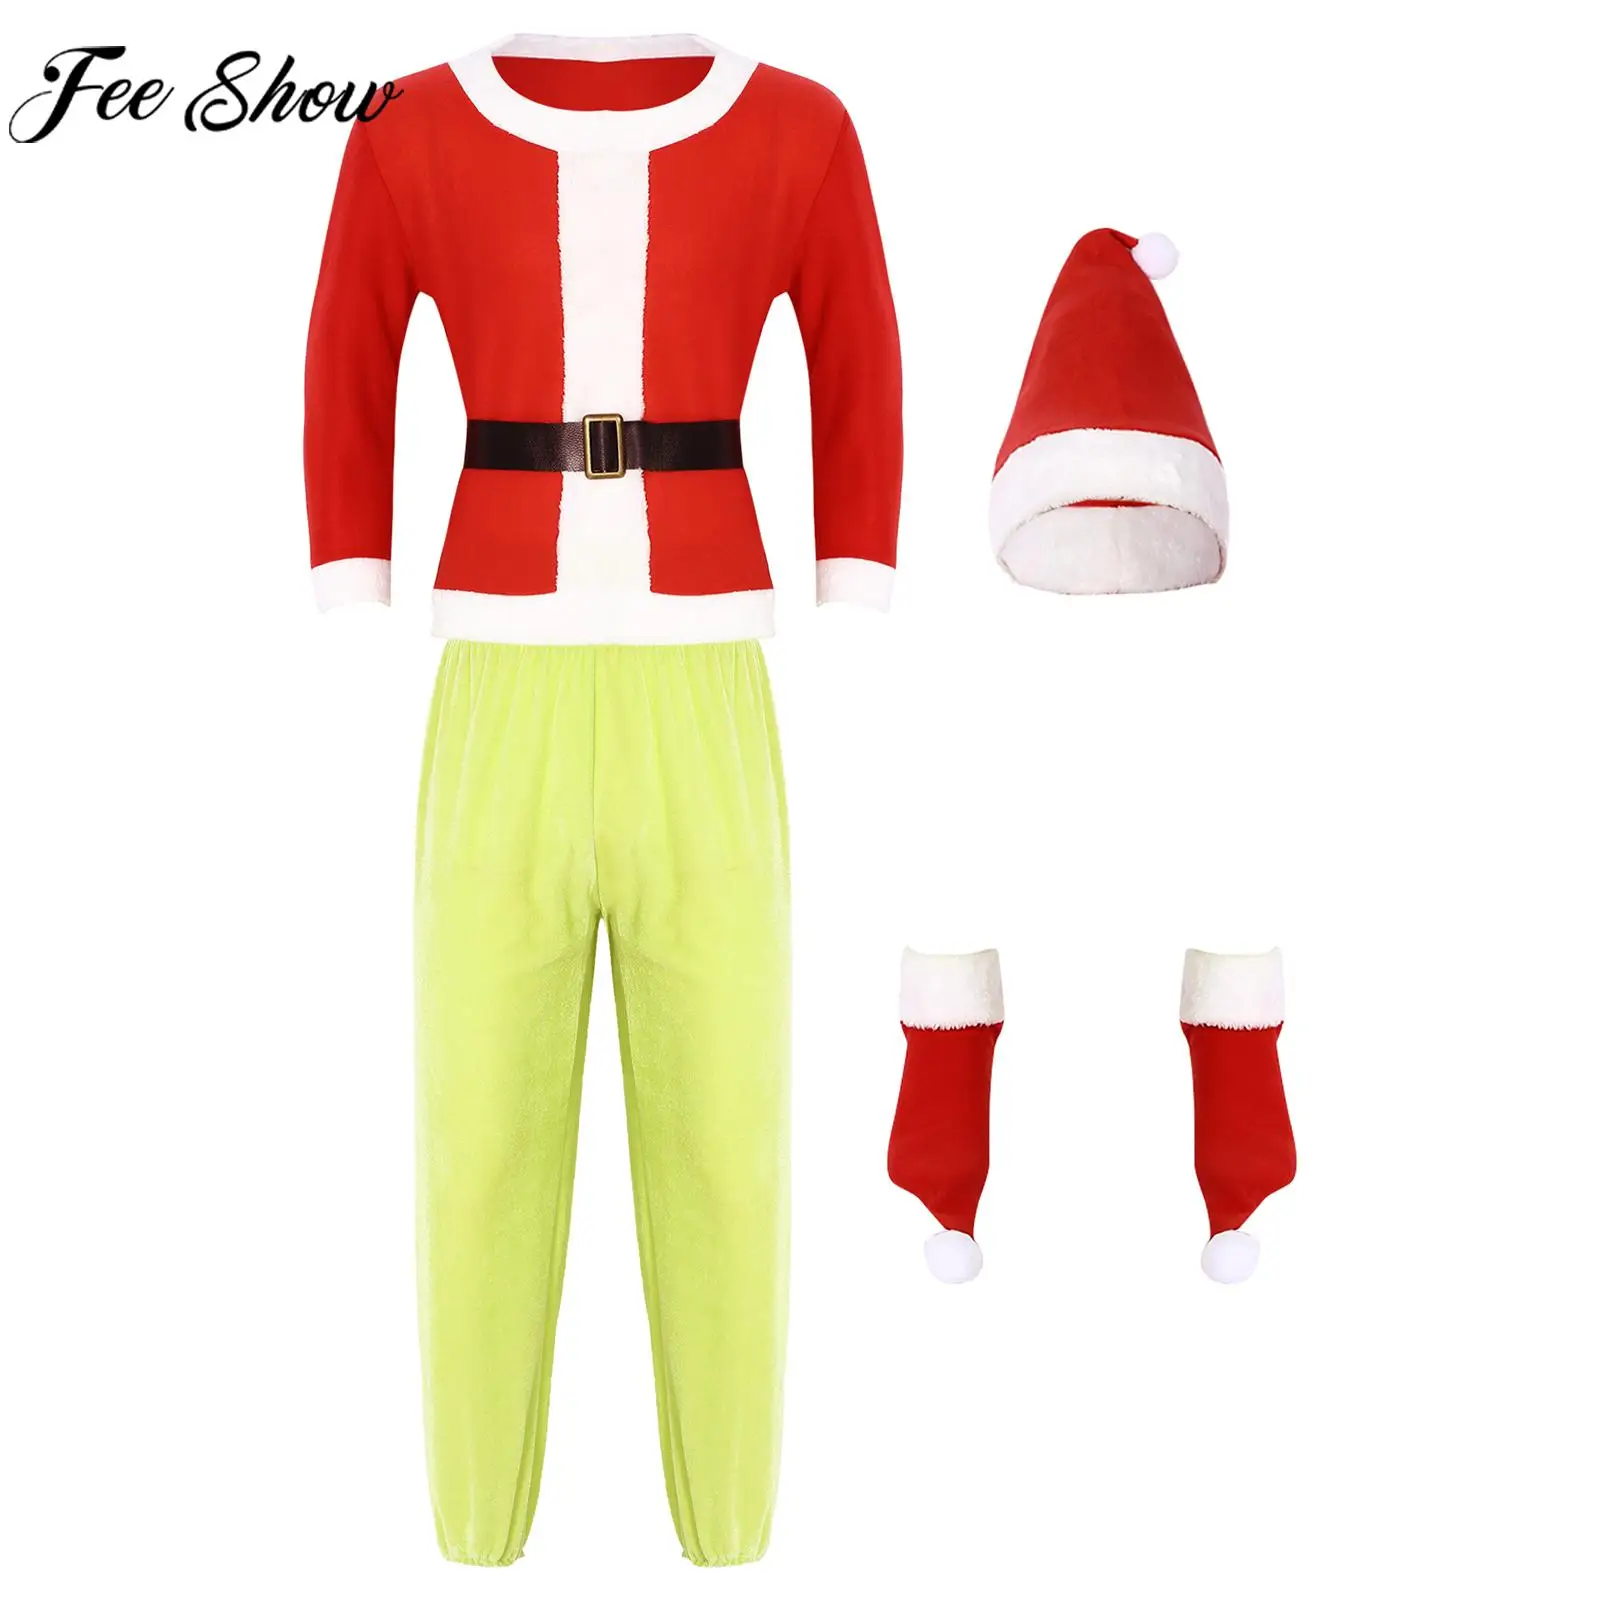 

Adults Christmas Santa Claus Cosplay Costume Xmas New Year Theme Party Masquerade Roleplay Show Outfit Hat Tops Pants Belt Set